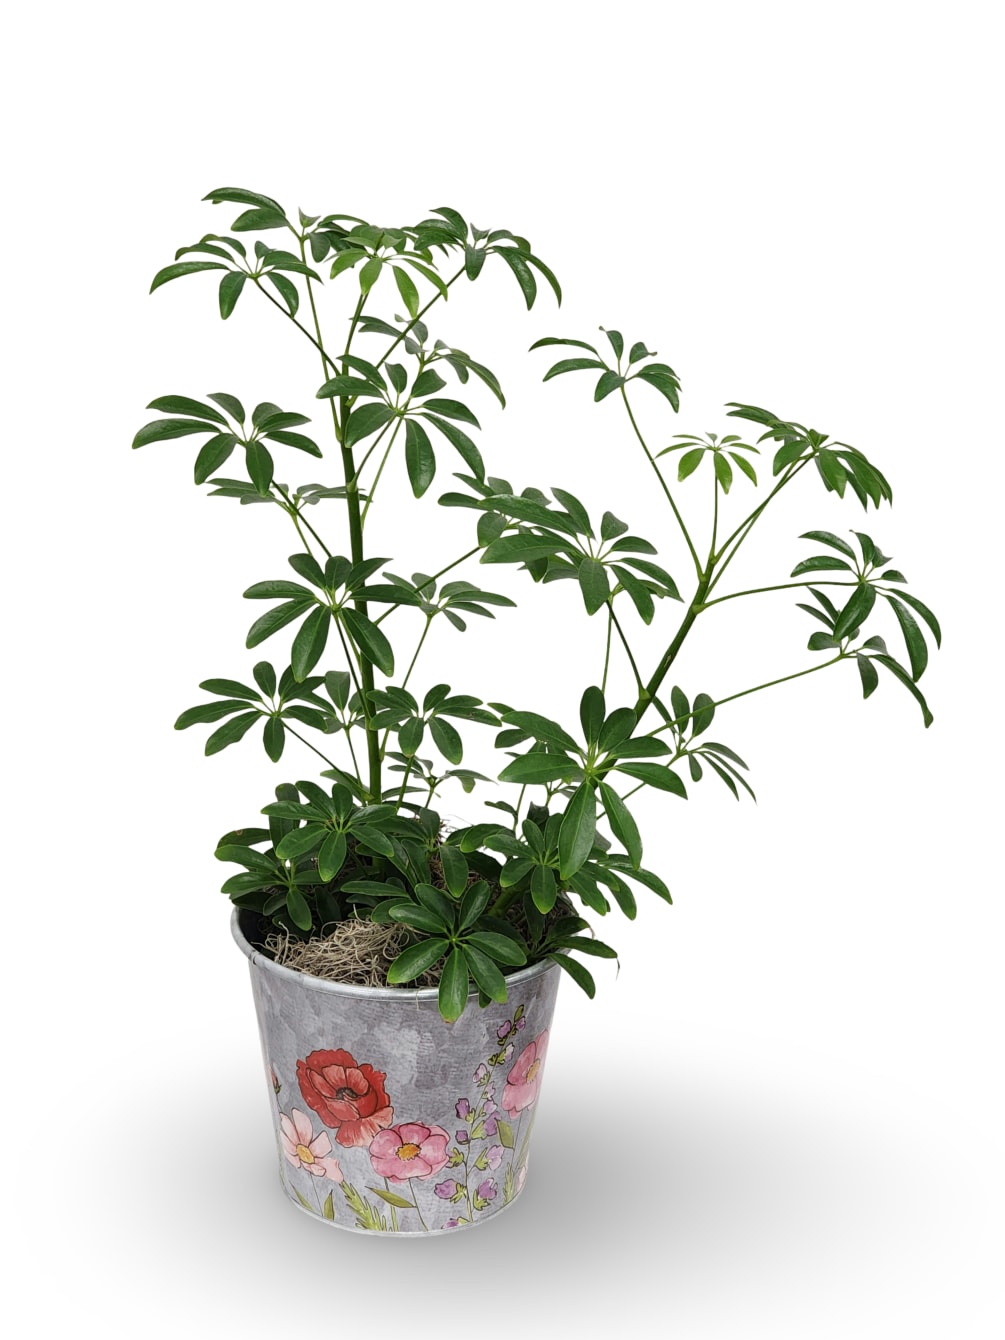 Select this stunning 6&quot; Schefflera to brighten up your home!
Container may vary.